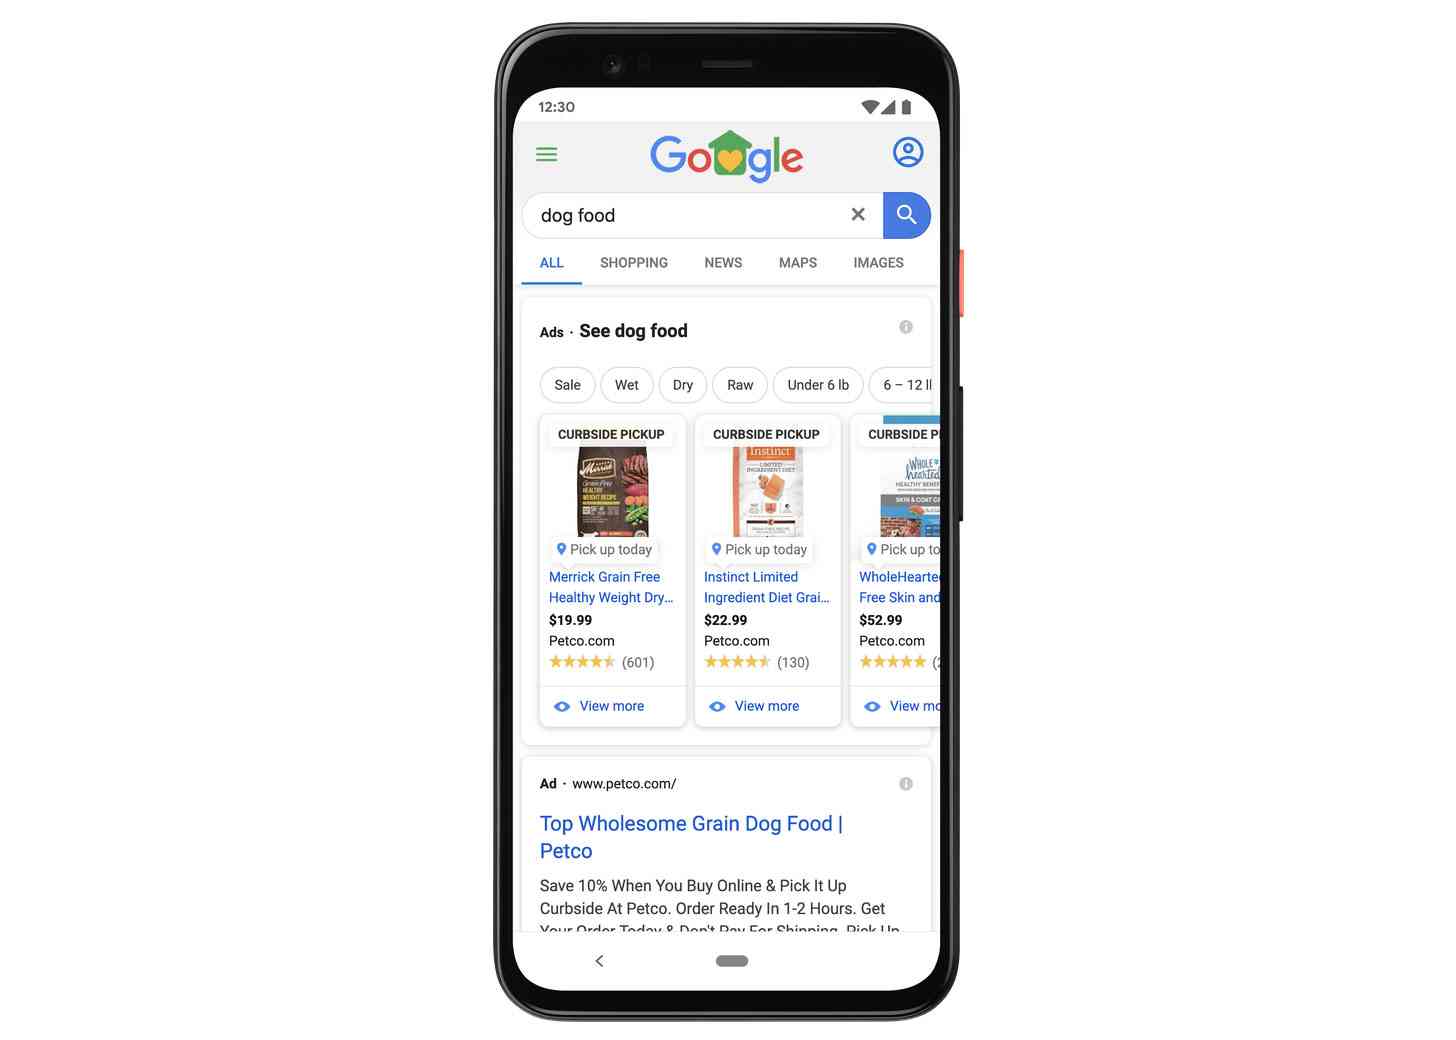 Google curbside pickup local inventory ads